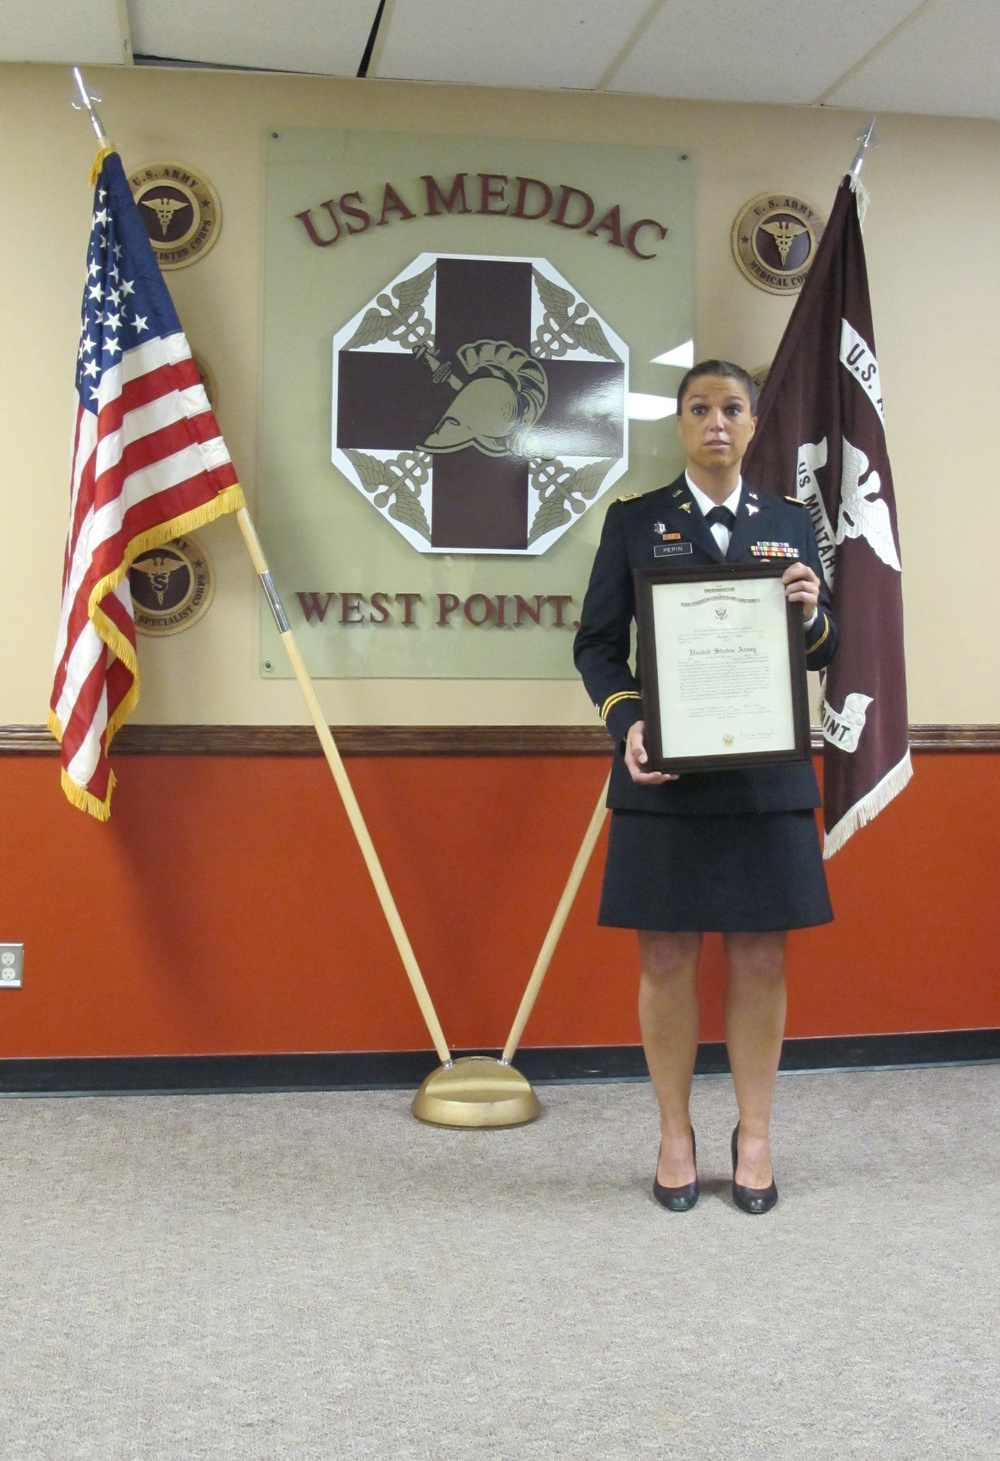 Capt. Tabatha Pepin's promotion to Major in the US Army